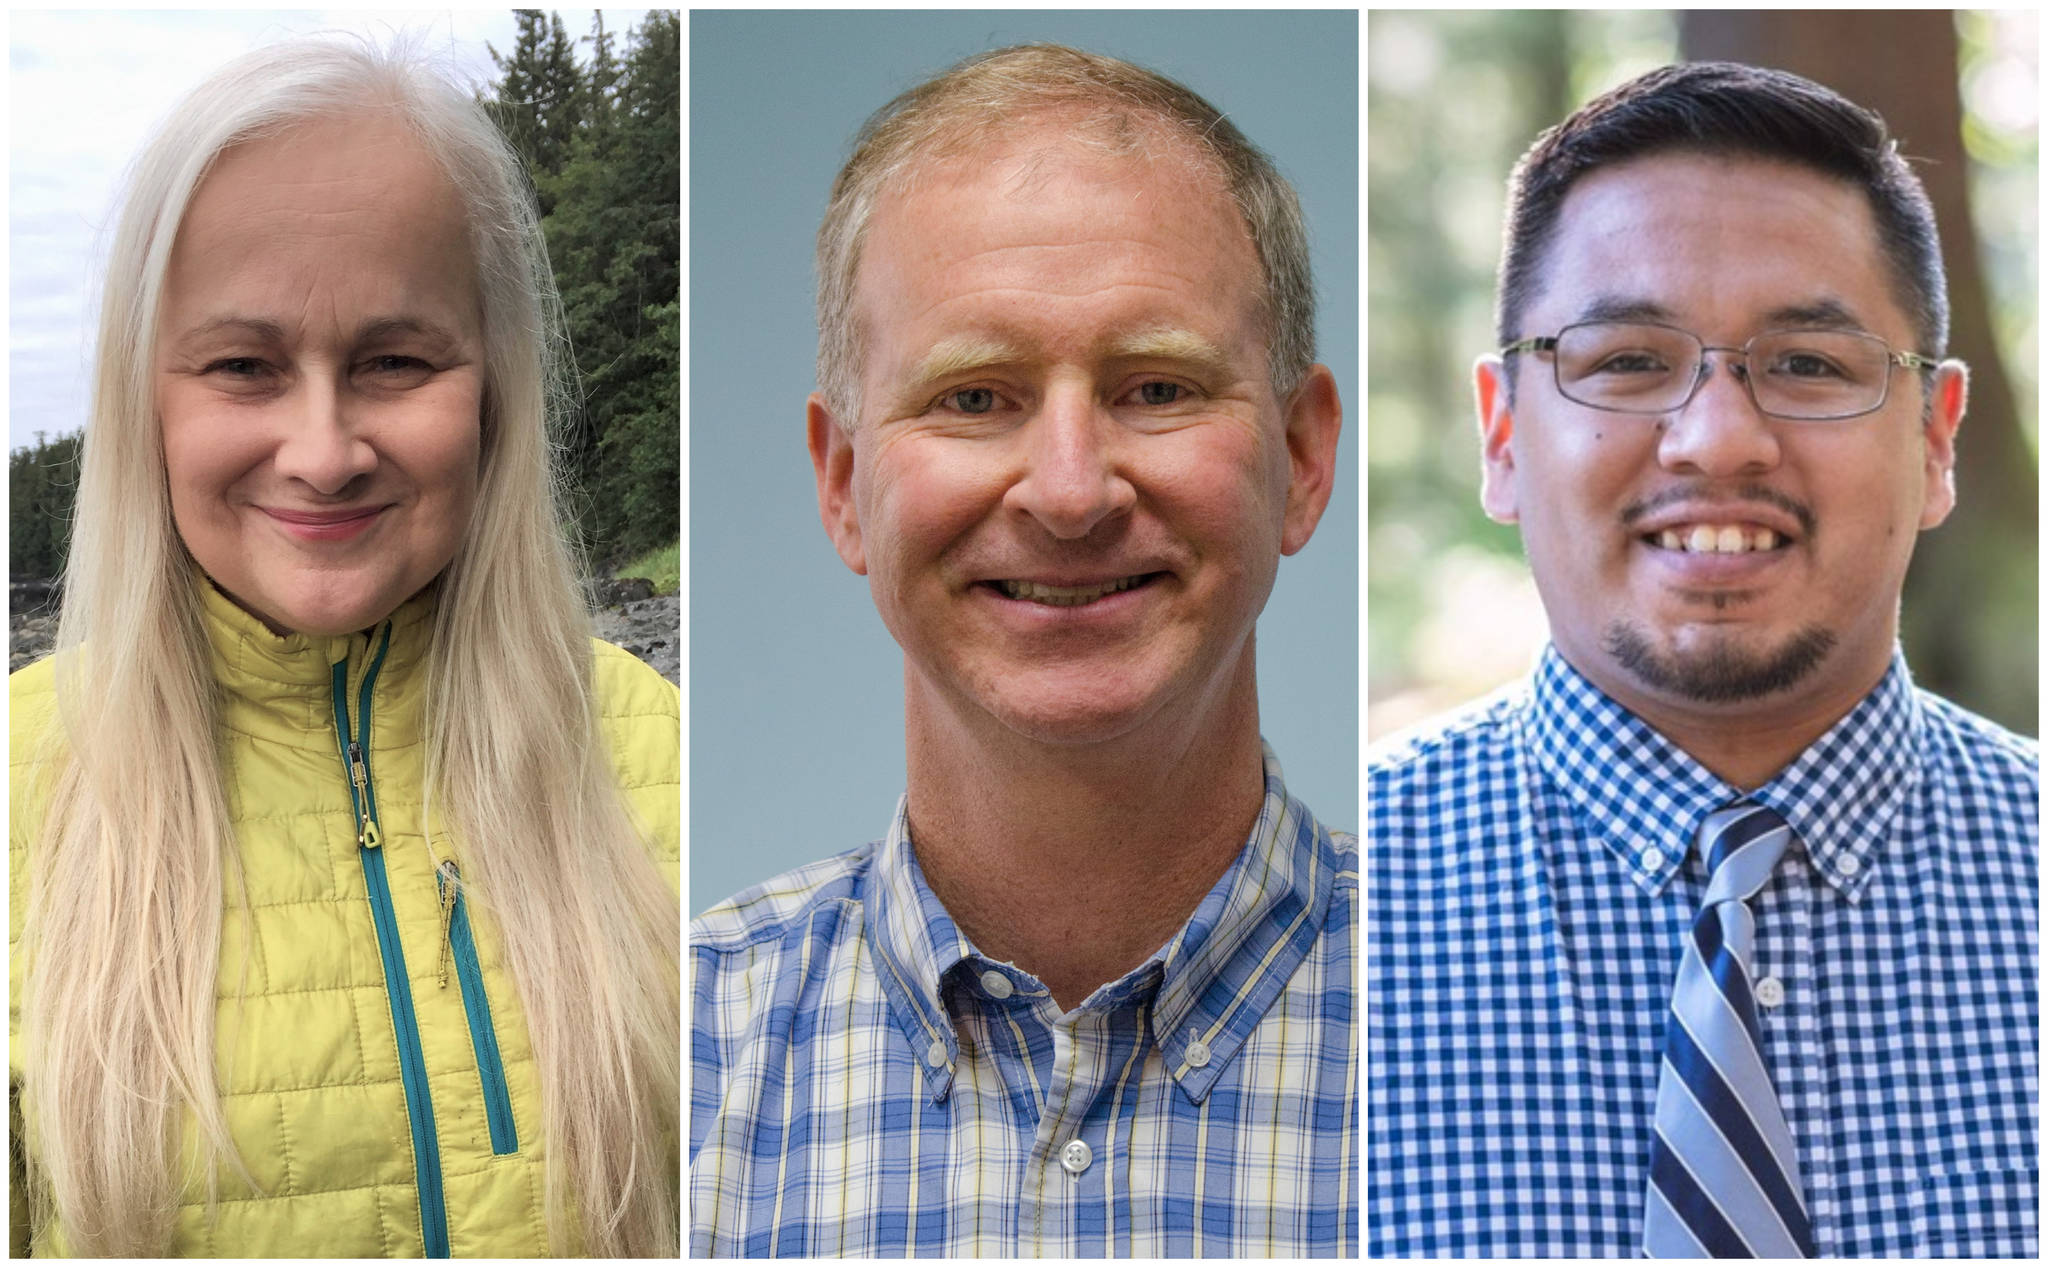 Maria Gladziszewski, Brian Holst, and Martin Stepetin are running uncontested for seats on the Assembly and Board of Education respectively. (Photo illustration / Juneau Empire)